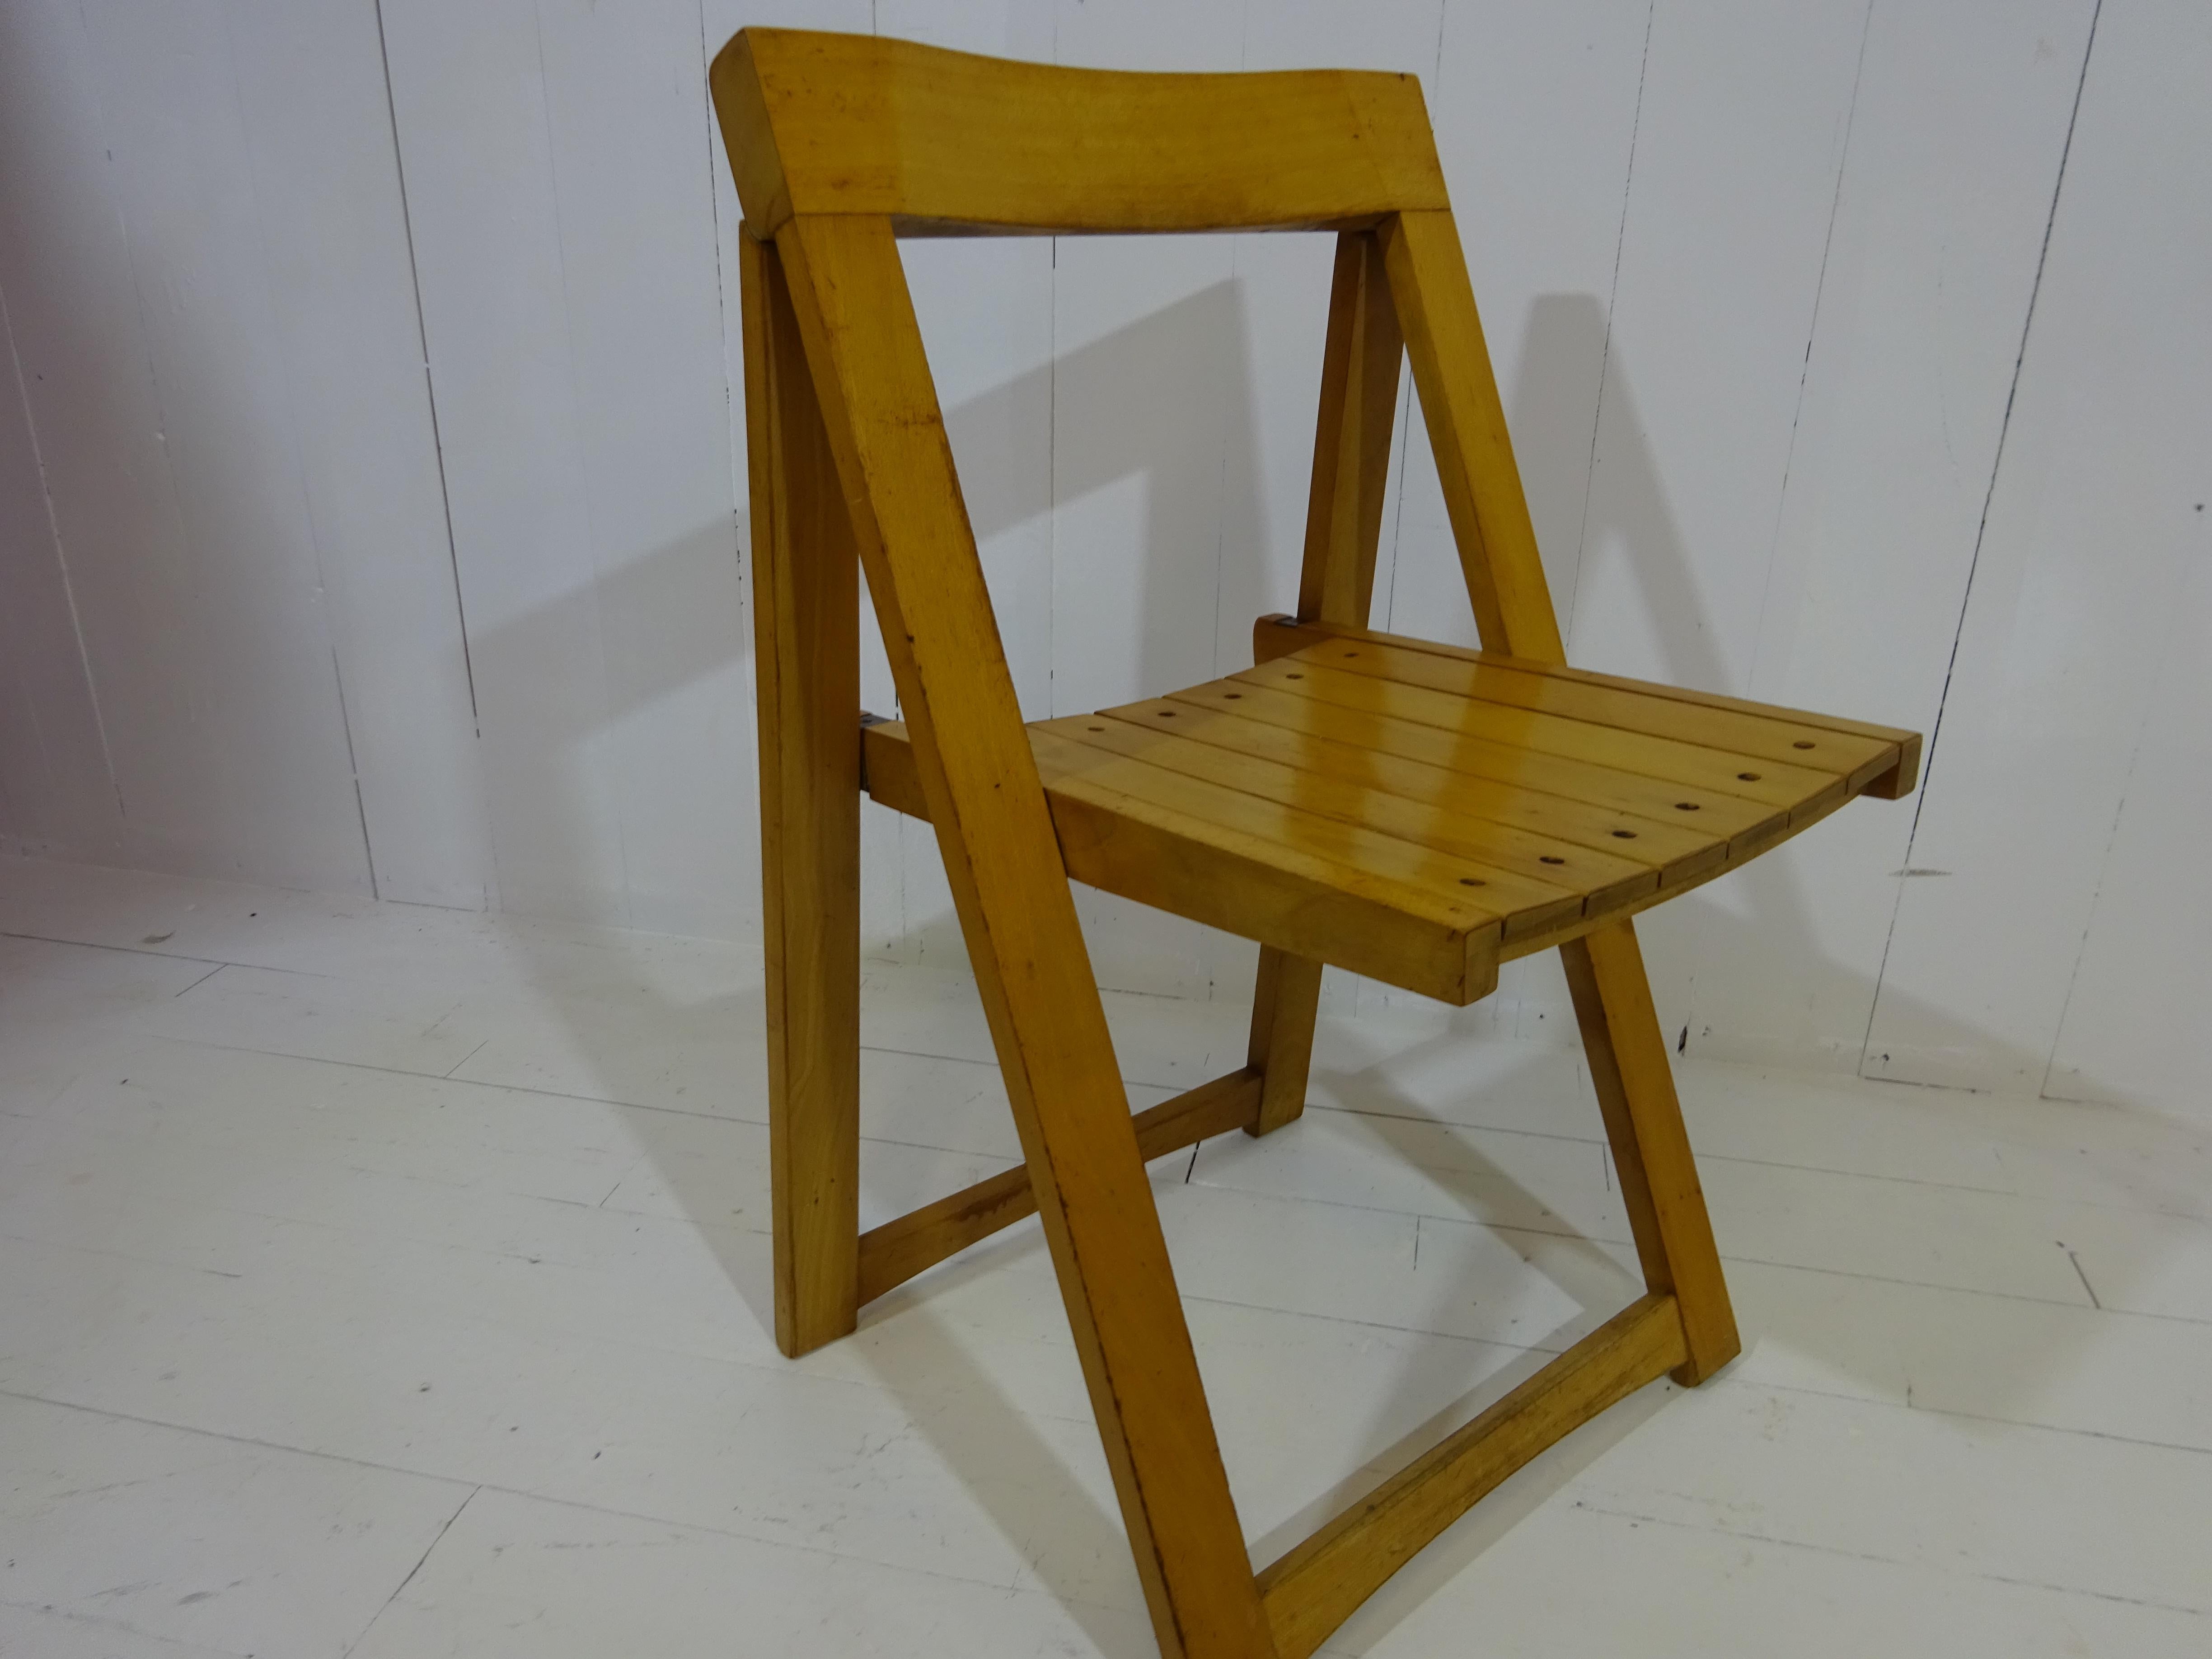 Folding chair by Aldo Jacober 

A design icon from the 1960's! 

Italian design folding chair by Aldo Jacober for Alberto Bazzani 1966. It is made of solid beech, beautiful patina on the wood adding character. A practical chair offering an